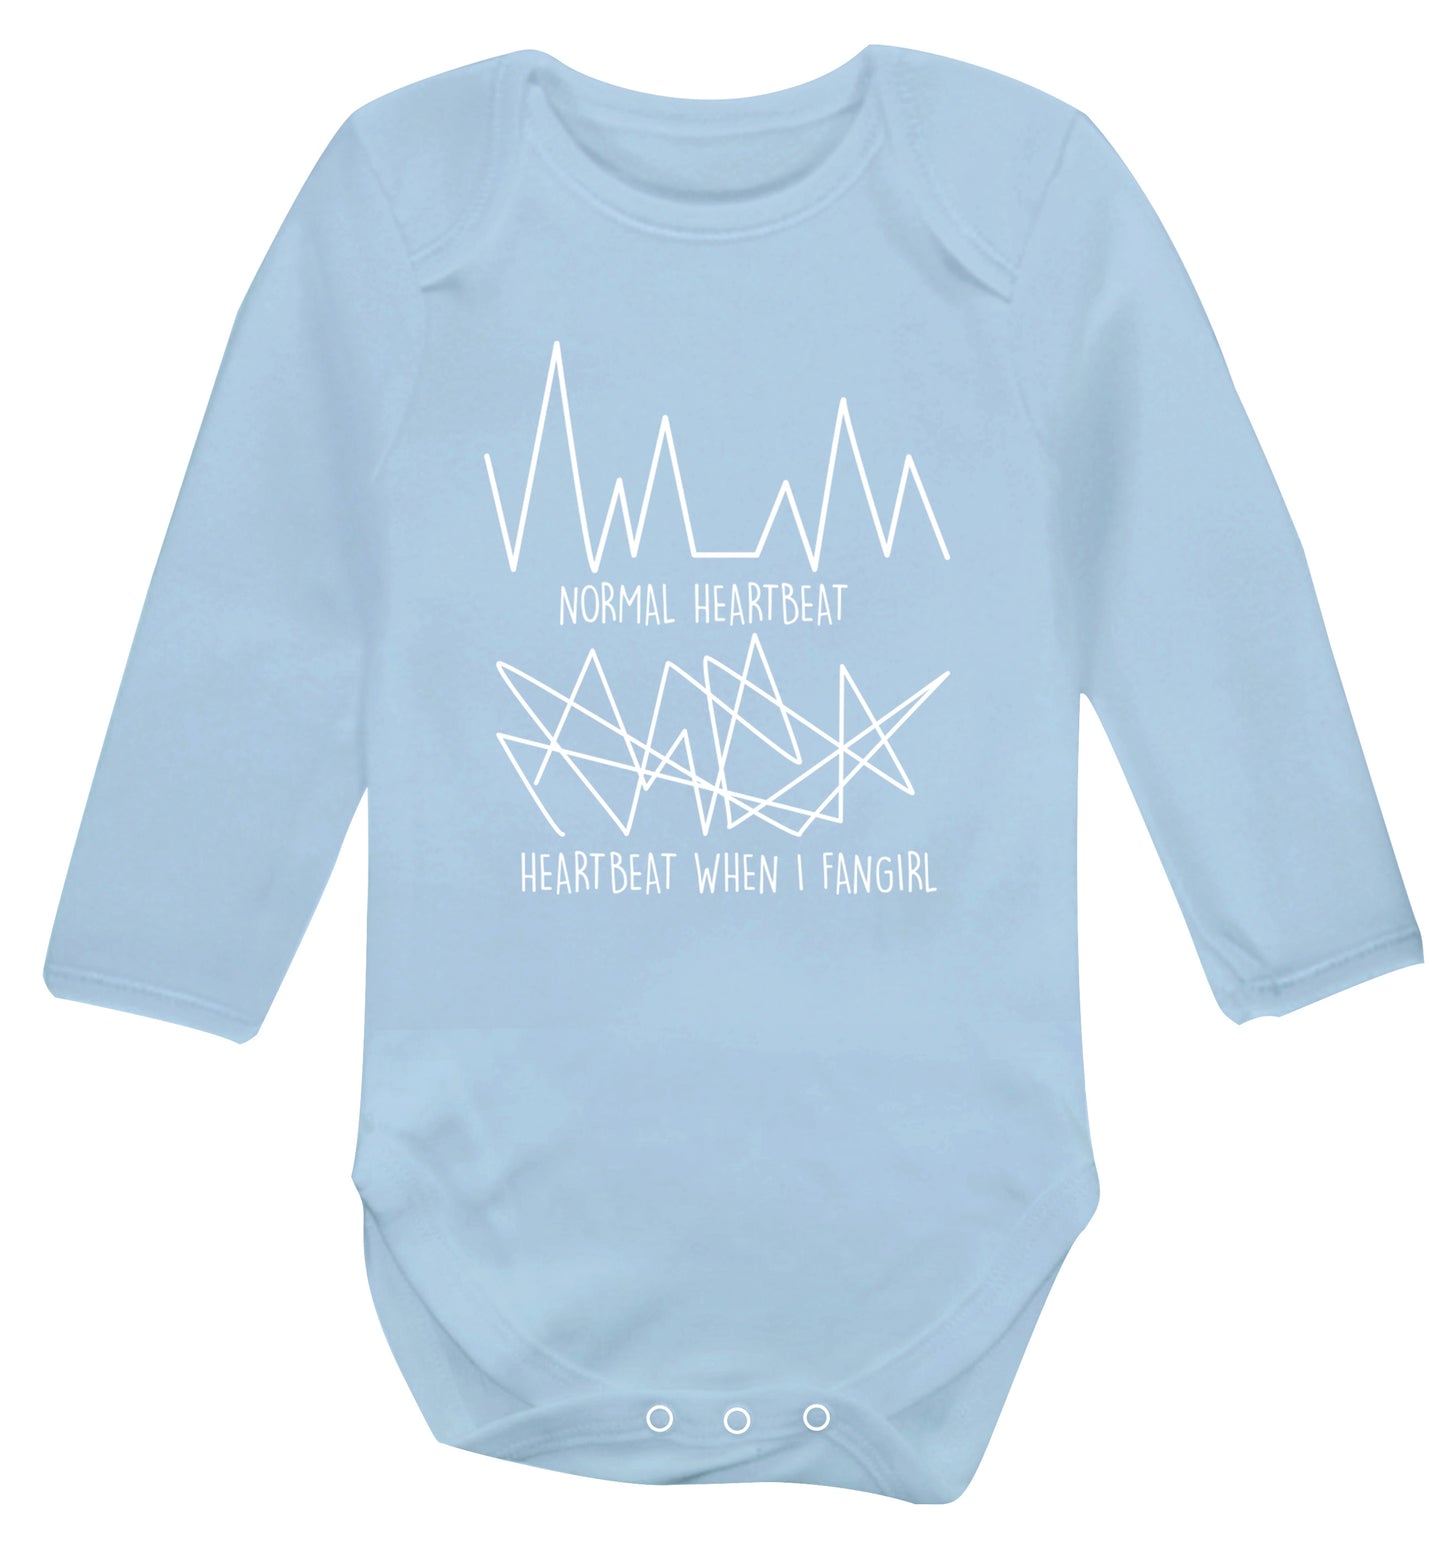 Normal heartbeat heartbeat when I fangirl Baby Vest long sleeved pale blue 6-12 months